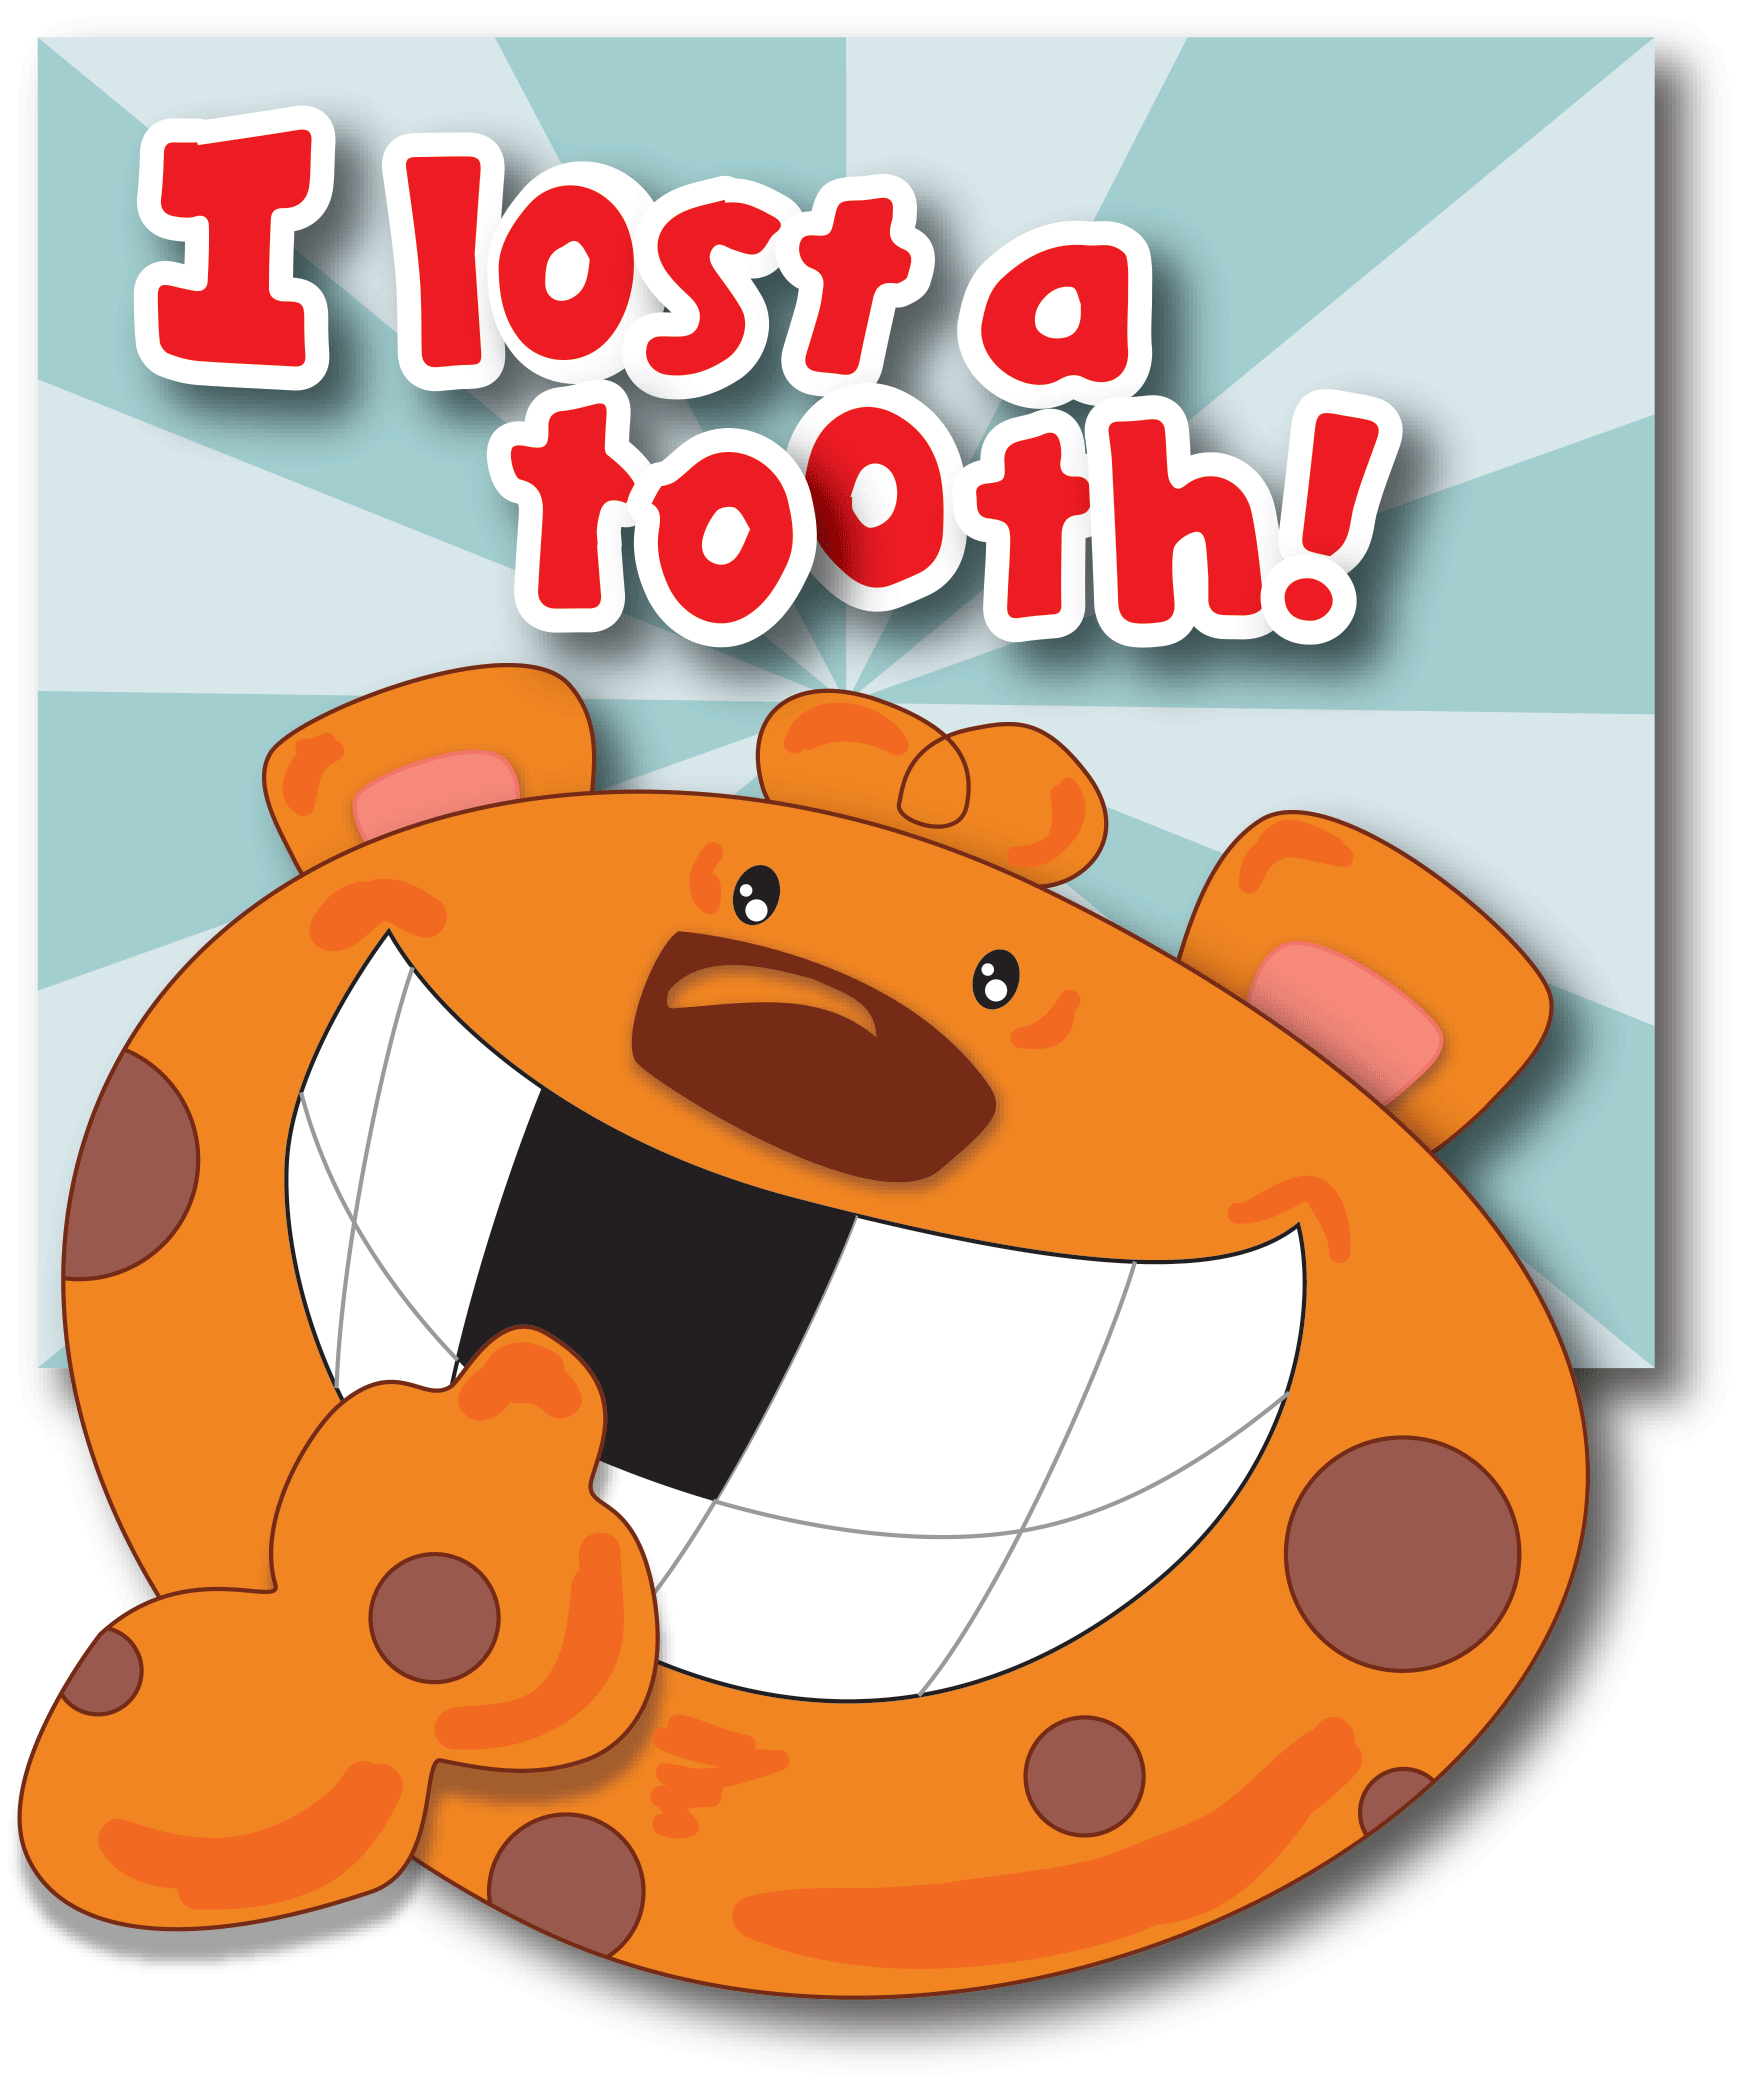 Image - I Lost a Tooth!